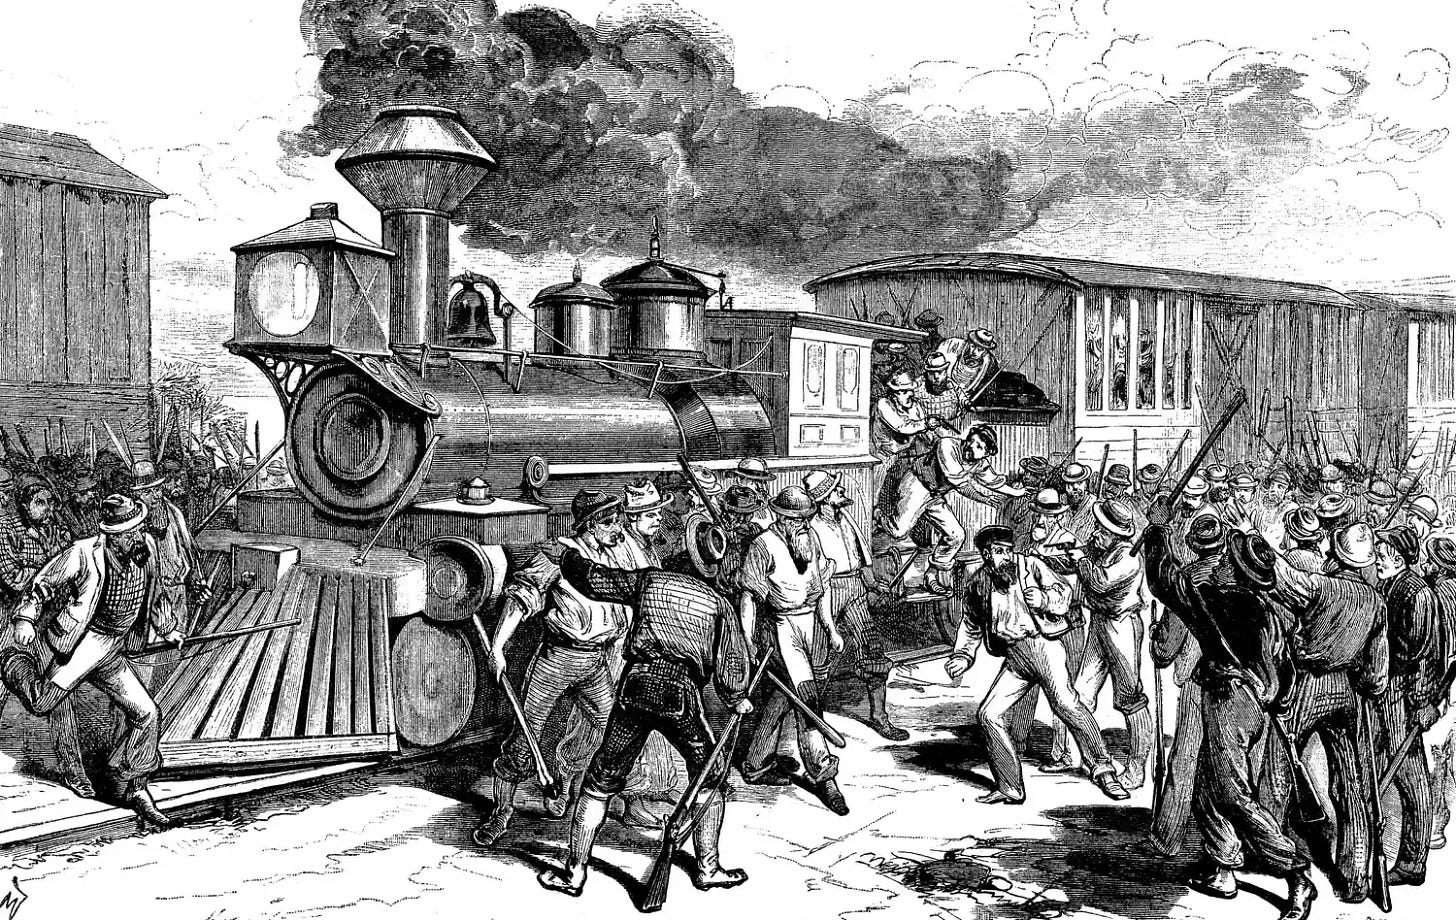 Depiction of the beginning of the 1877 Great Railroad Strike